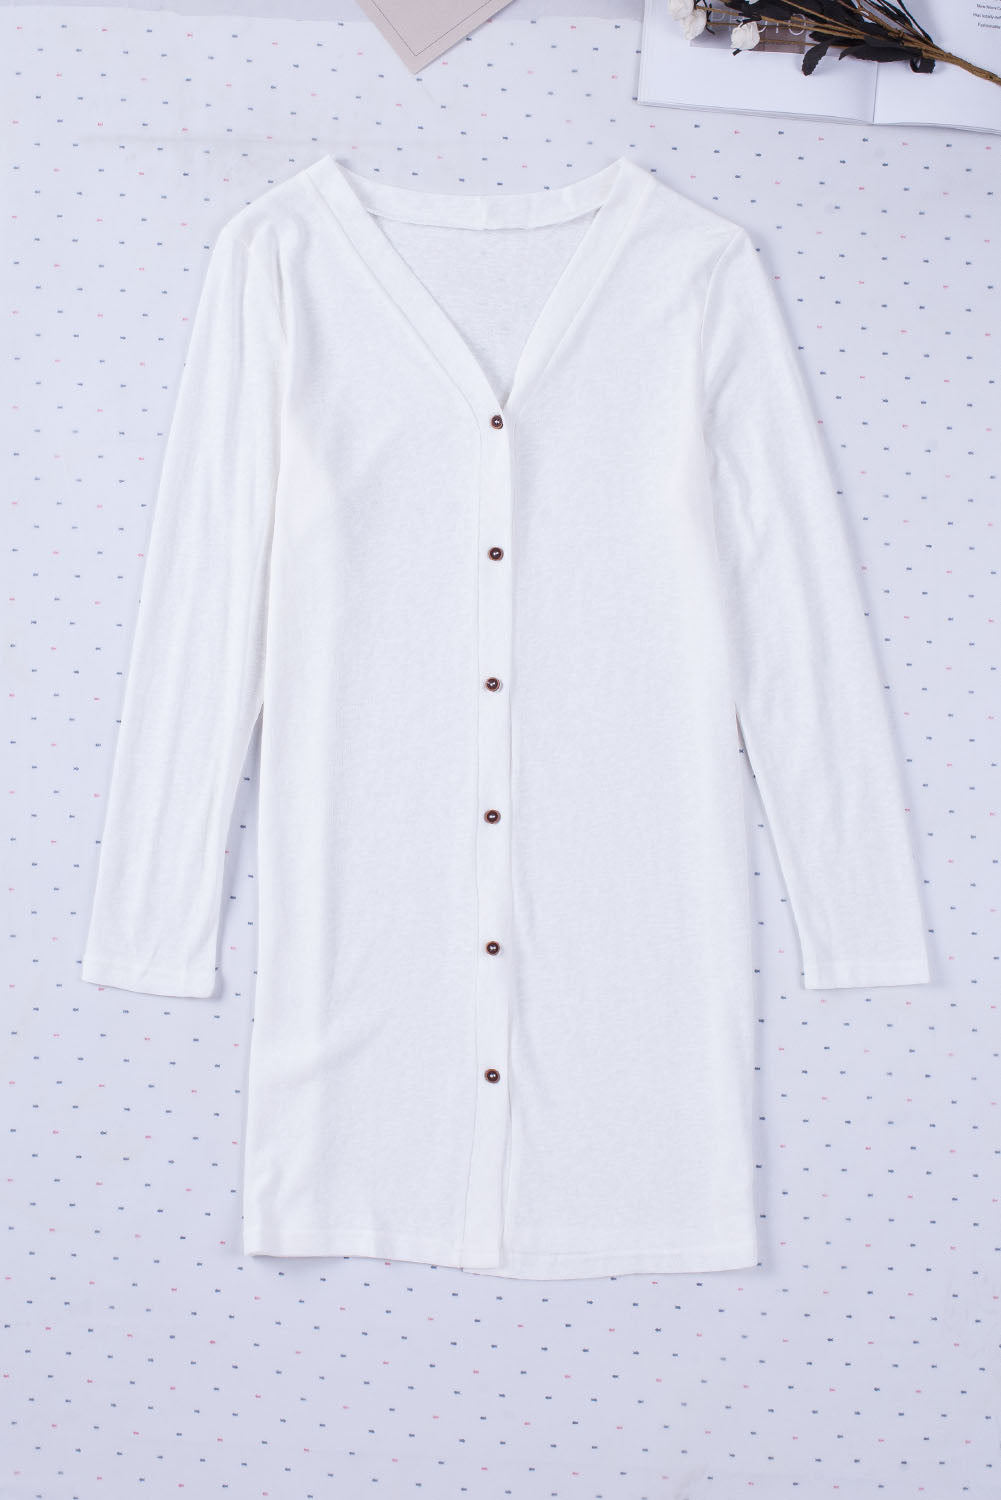 White Solid Color Open-Front Buttons Cardigan